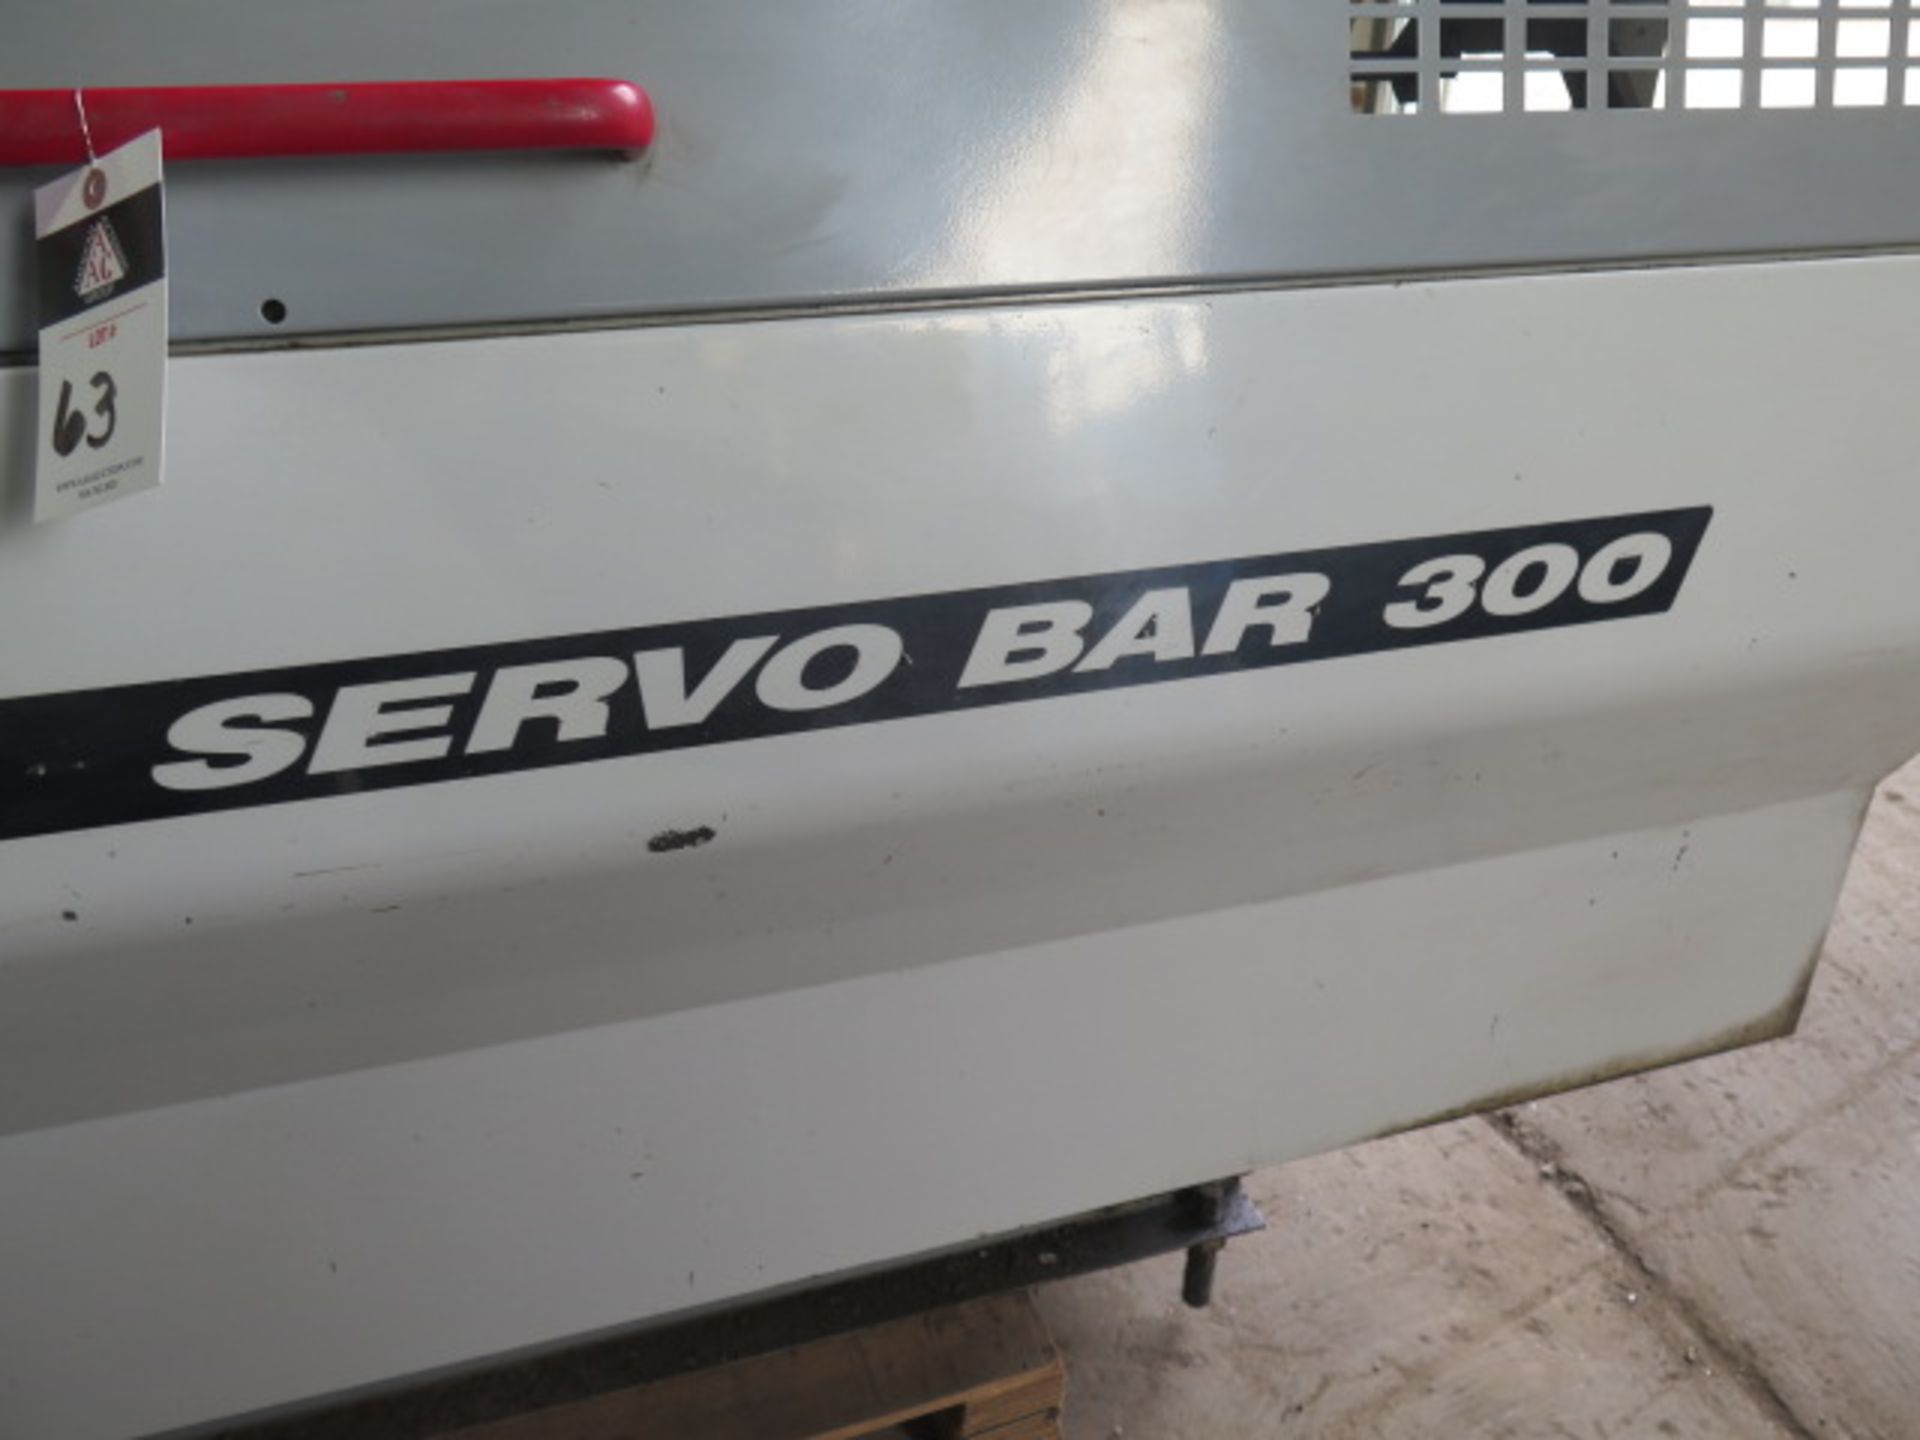 Haas ServoBar 300 Automatic Bar Loader / Feeder (SOLD AS-IS - NO WARRANTY) - Image 5 of 8